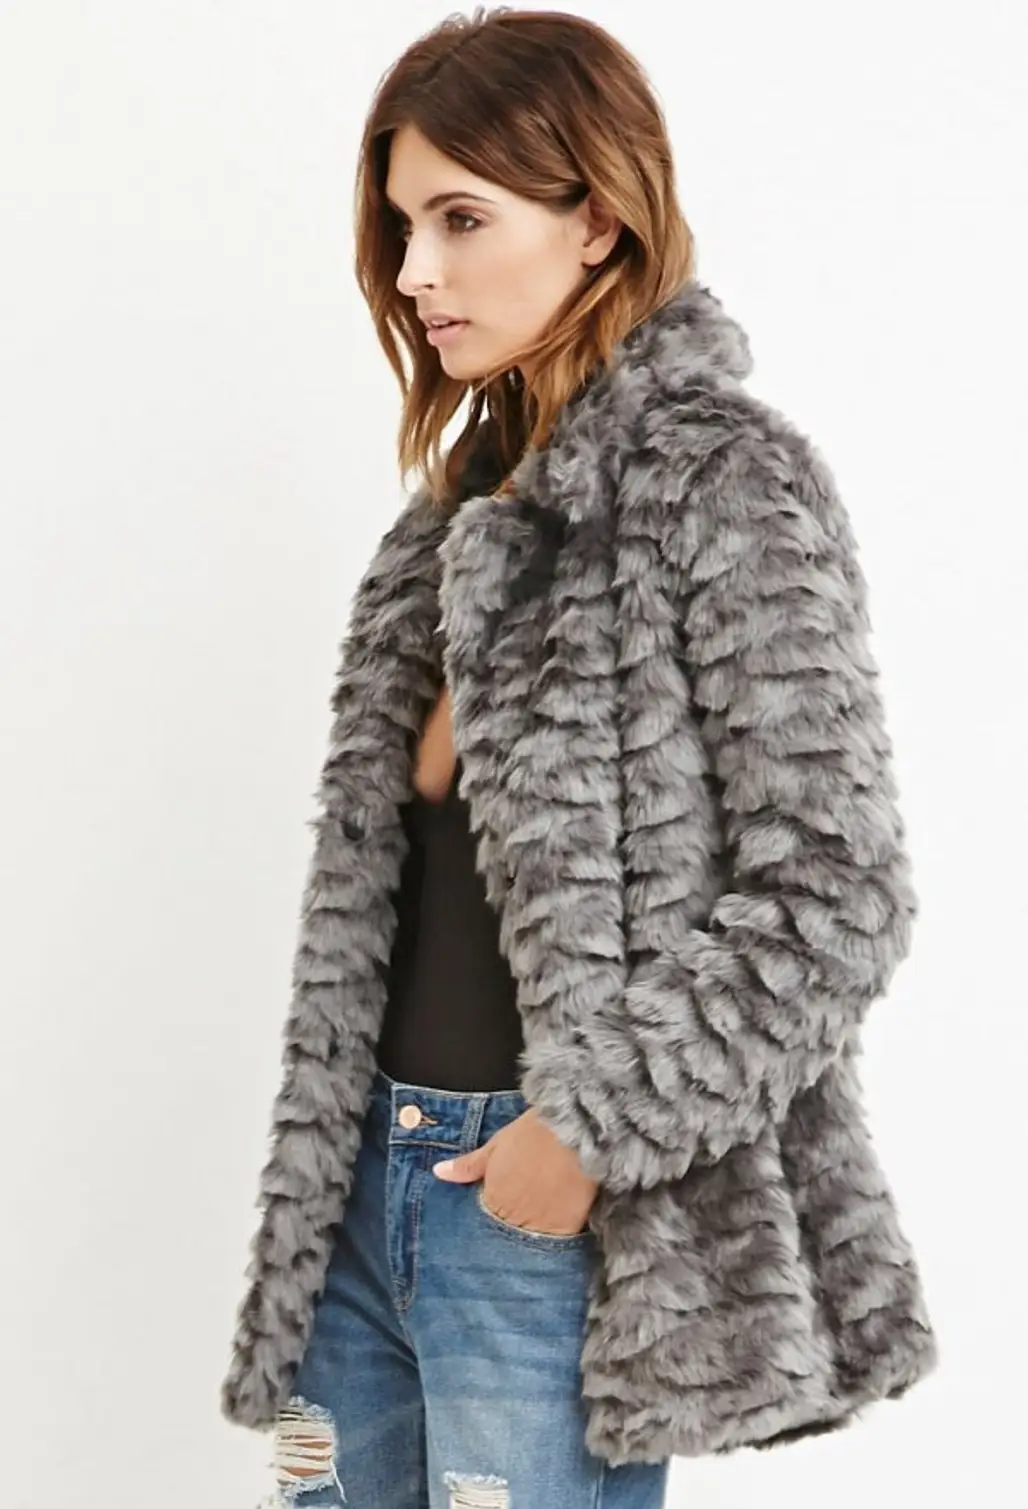 Chic Coats to Spend the Winter Wearing ...